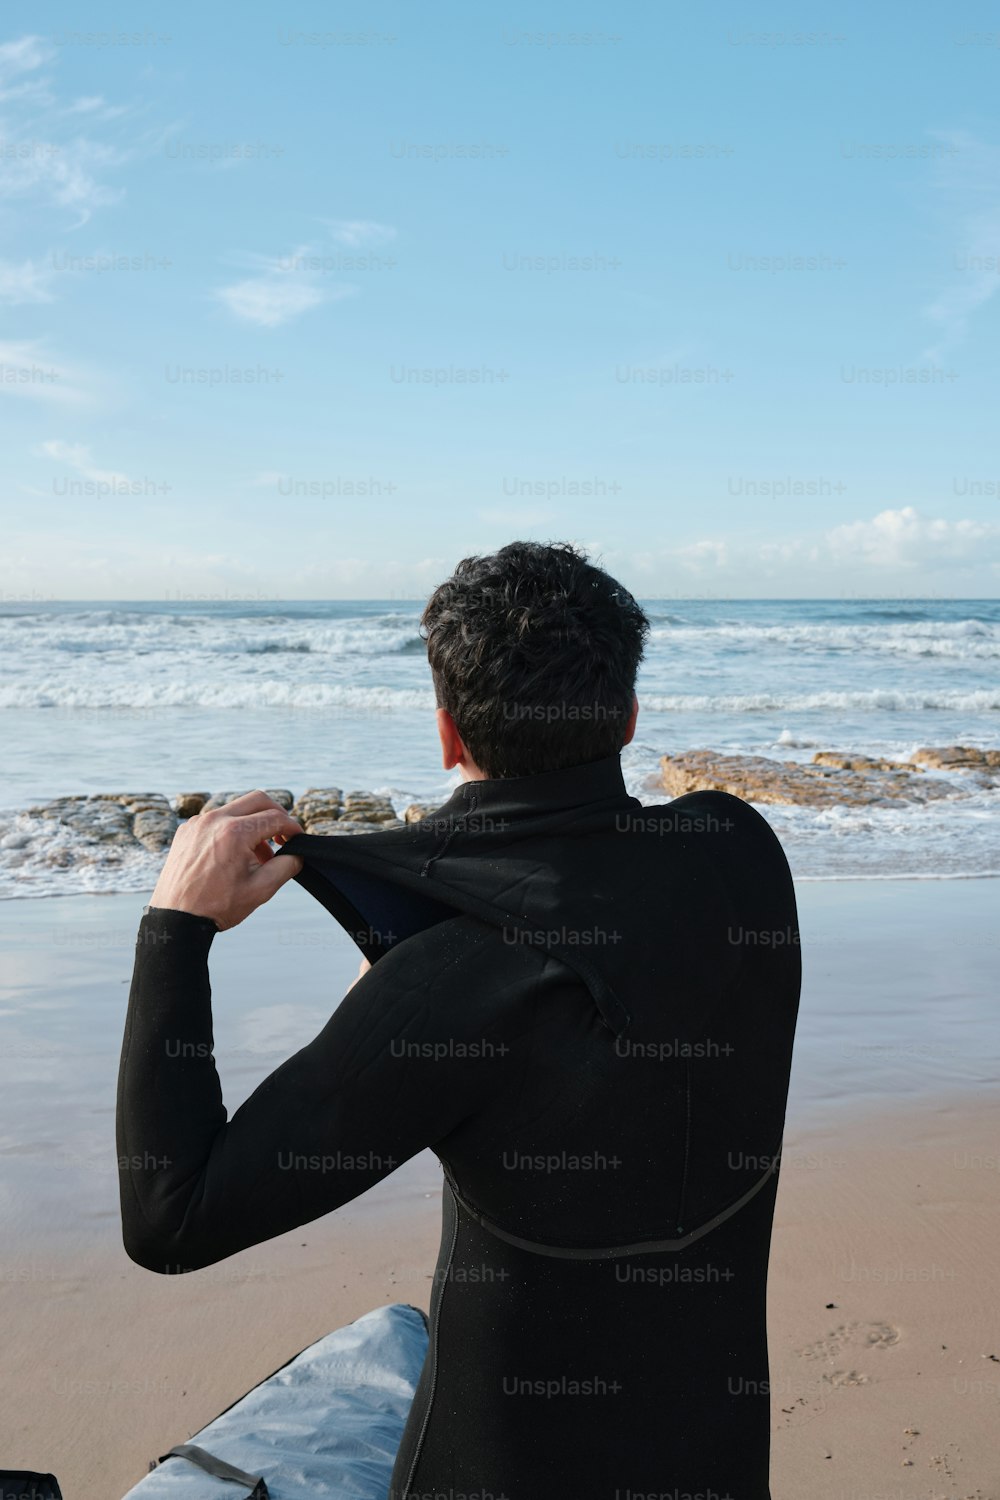 a man in a wet suit is sitting on a surfboard